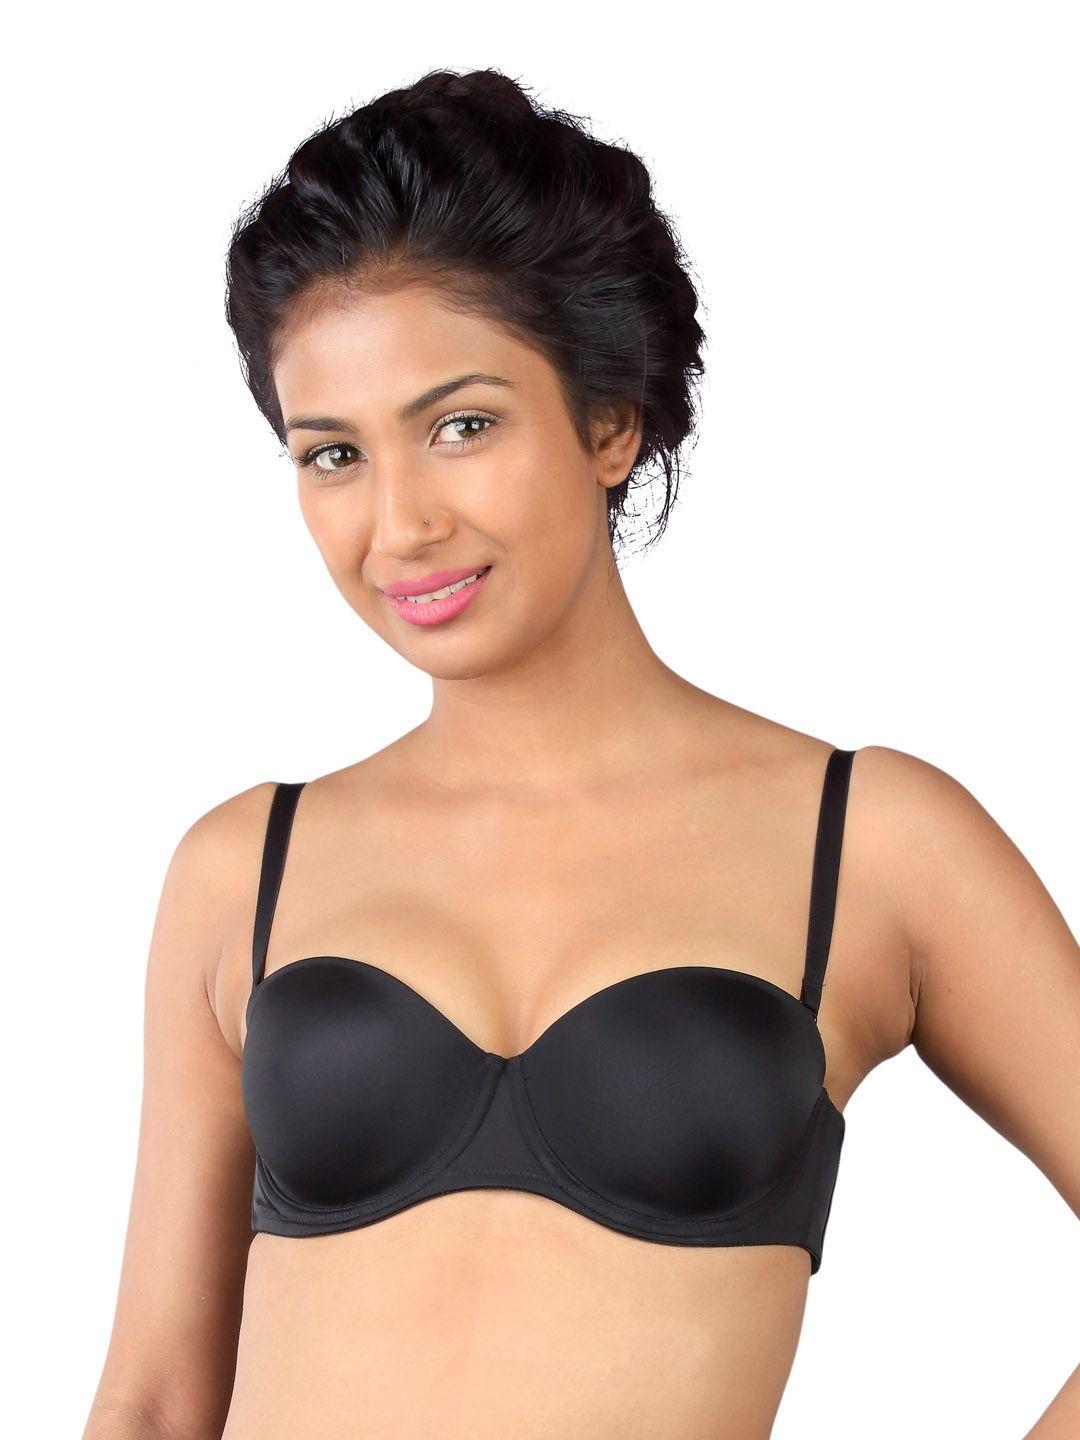 triumph t-shirt bra 101 invisible wired half cup padded detachable multioptional transparent backless party bra